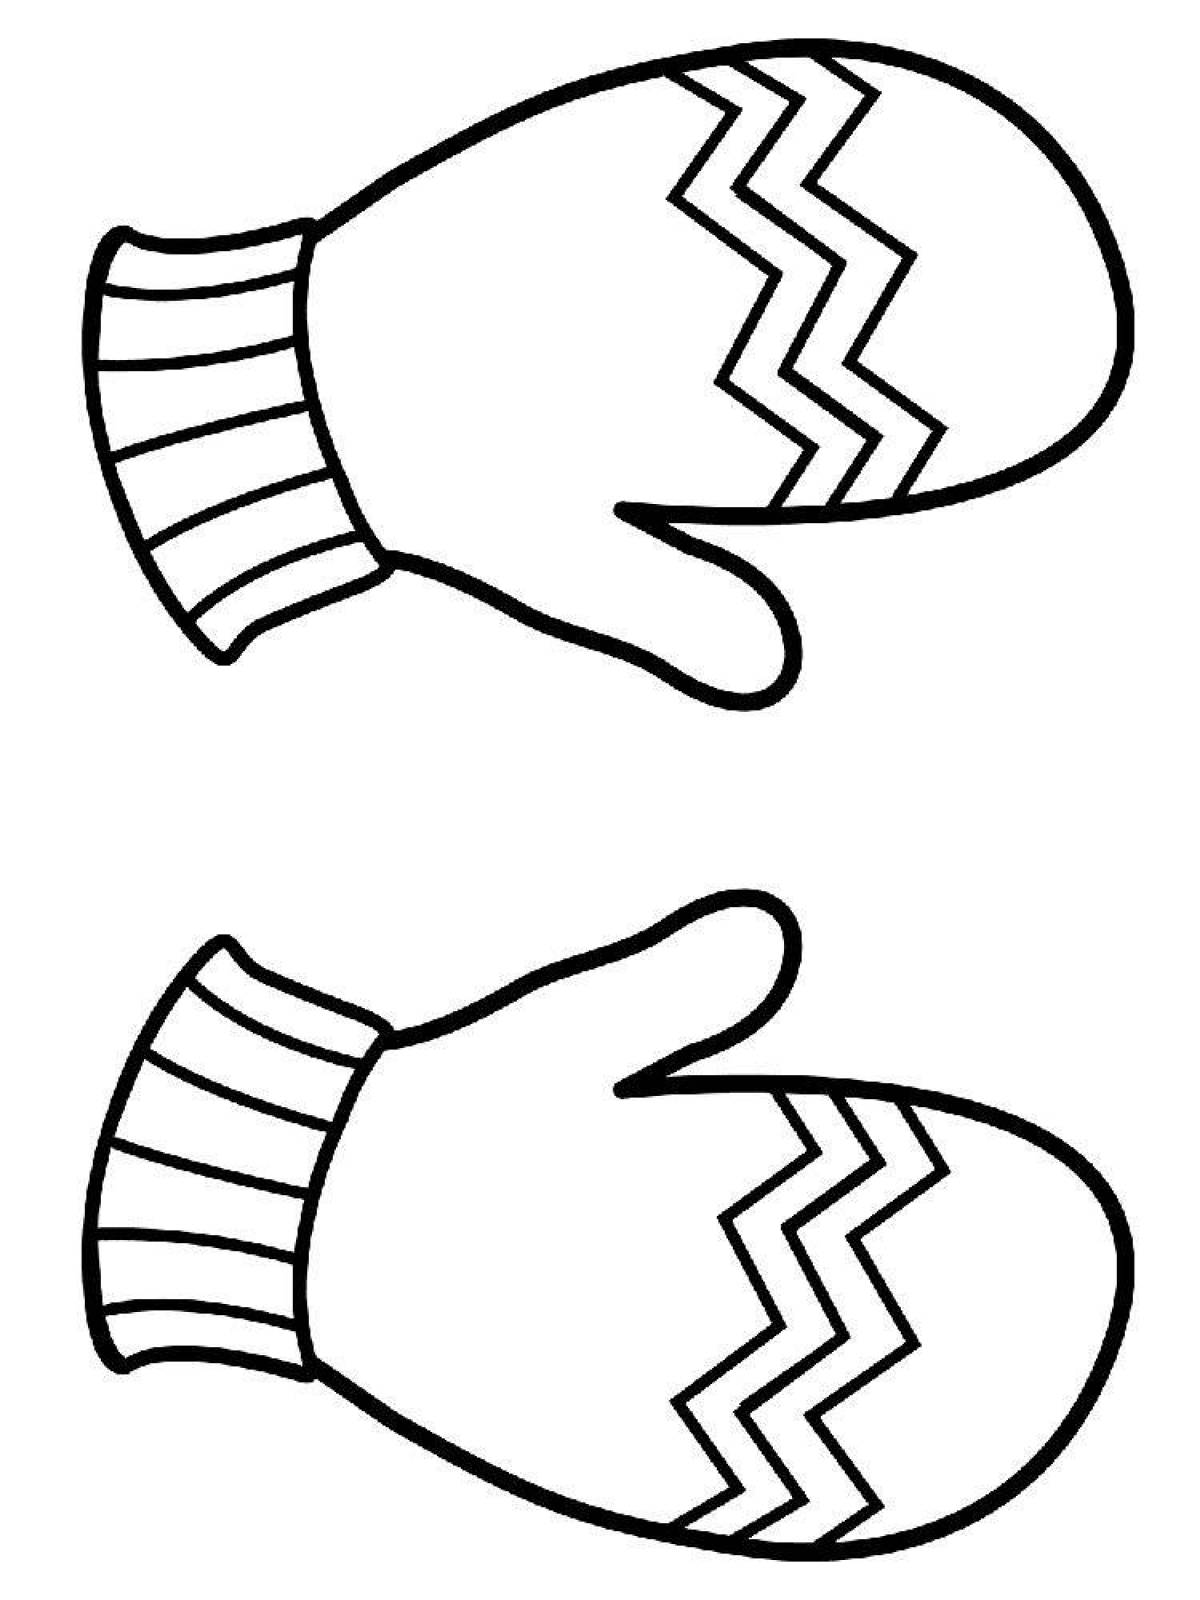 Amazing coloring pages of mittens for preschoolers